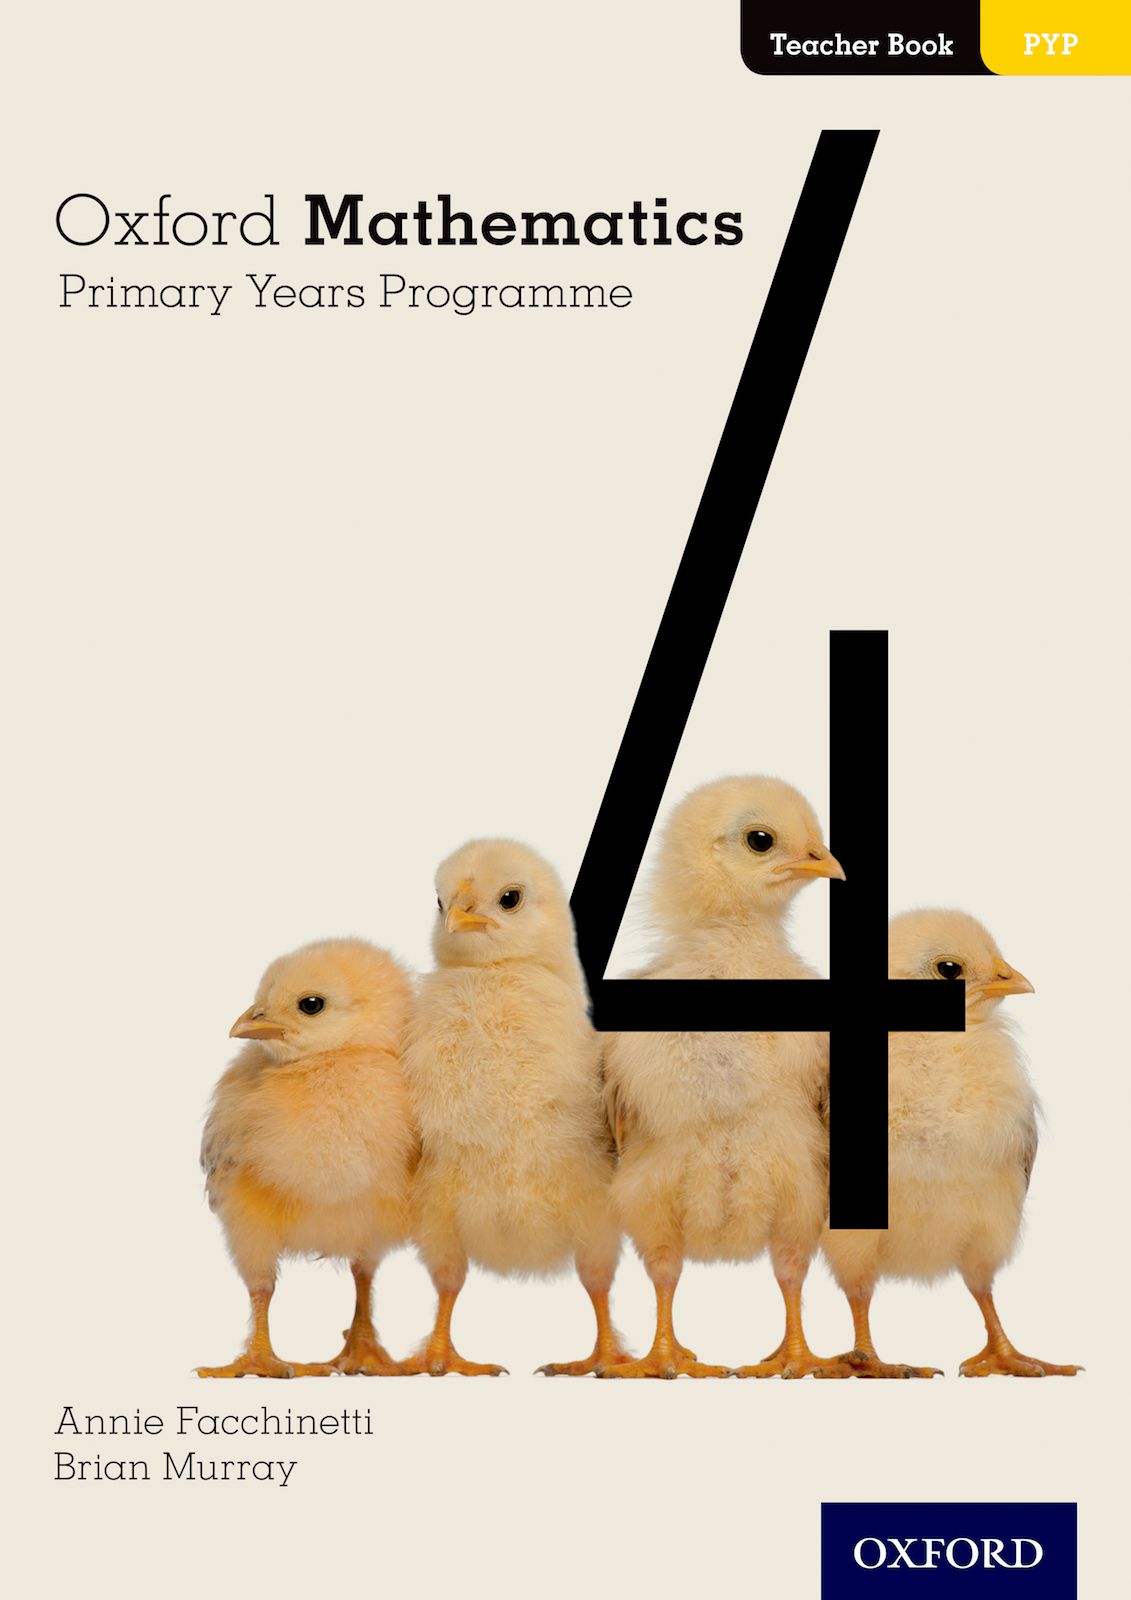 Featured image for “Oxford Mathematics Primary Years Programme Teacher Book 4”